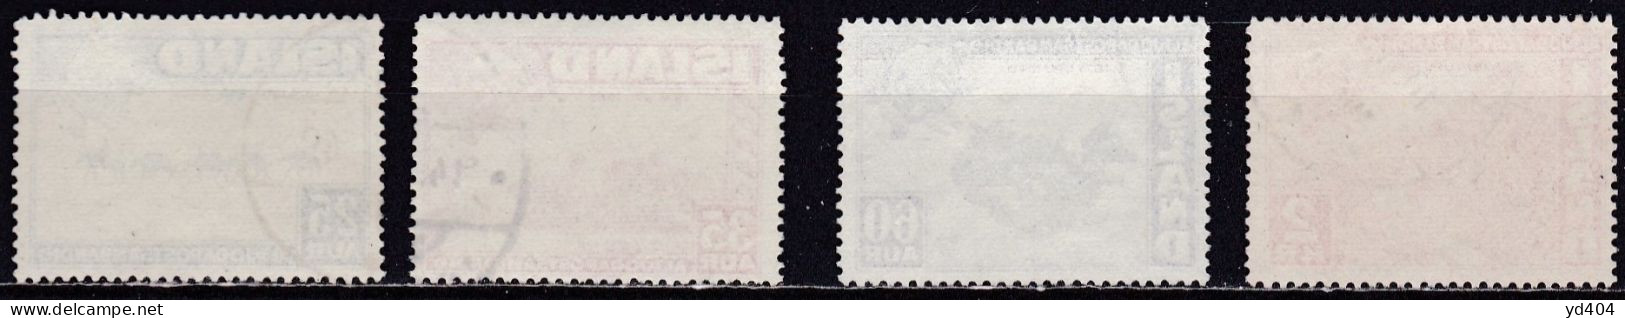 IS050 – ISLANDE – ICELAND – 1949 – 75th ANNIVERSARY OF UPU – SG # 292/5 USED 4,25 € - Oblitérés